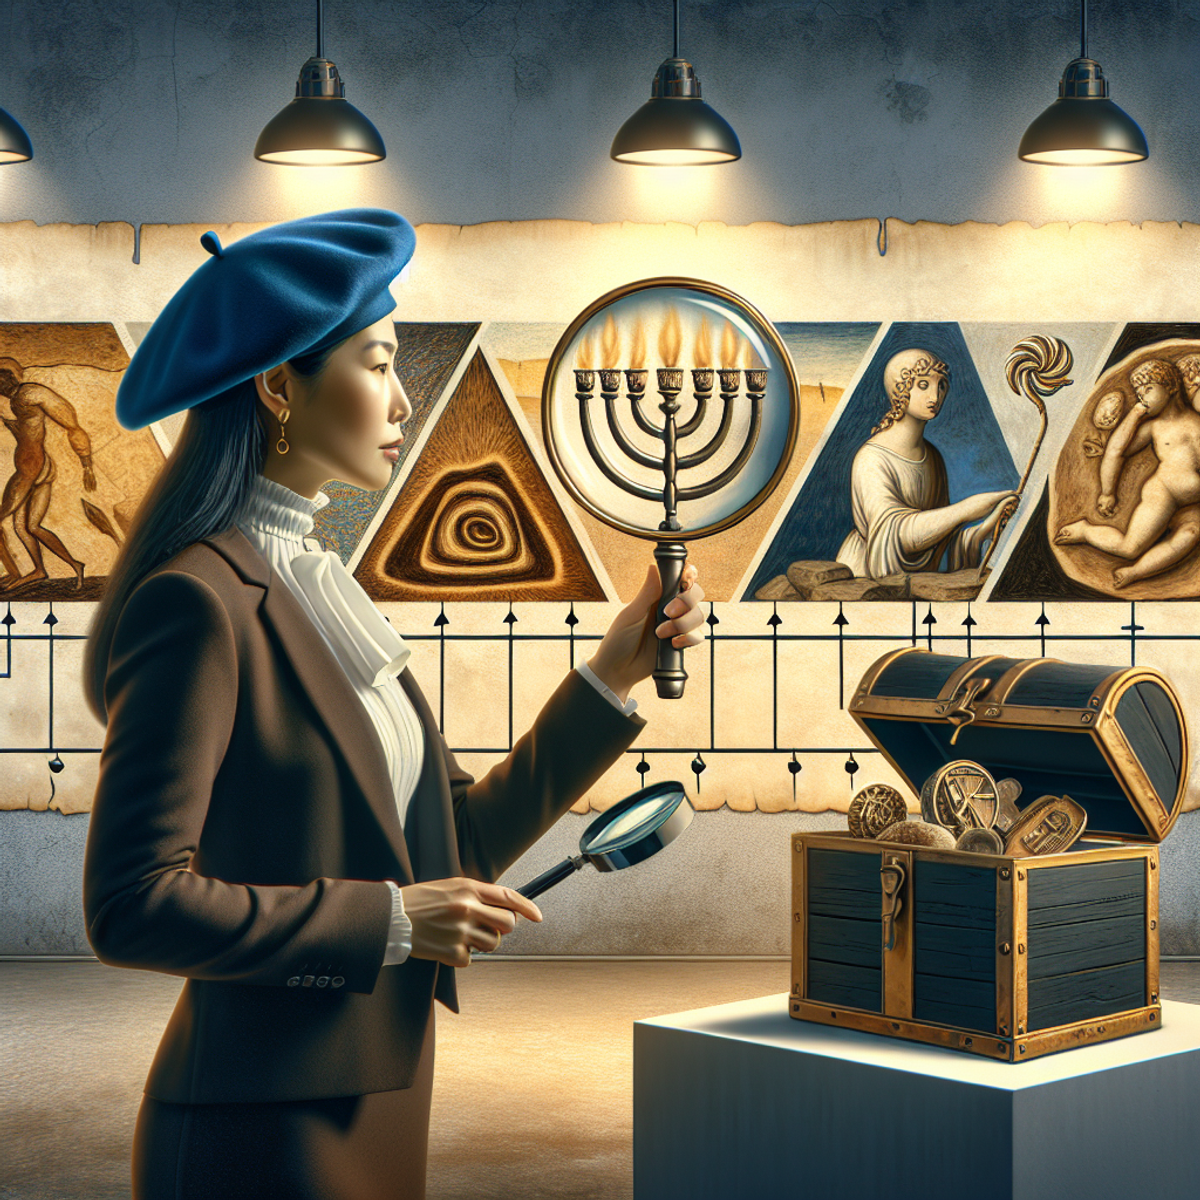 A woman in a beret examines a menorah and a treasure chest with a magnifying glass, surrounded by abstract art period representations.